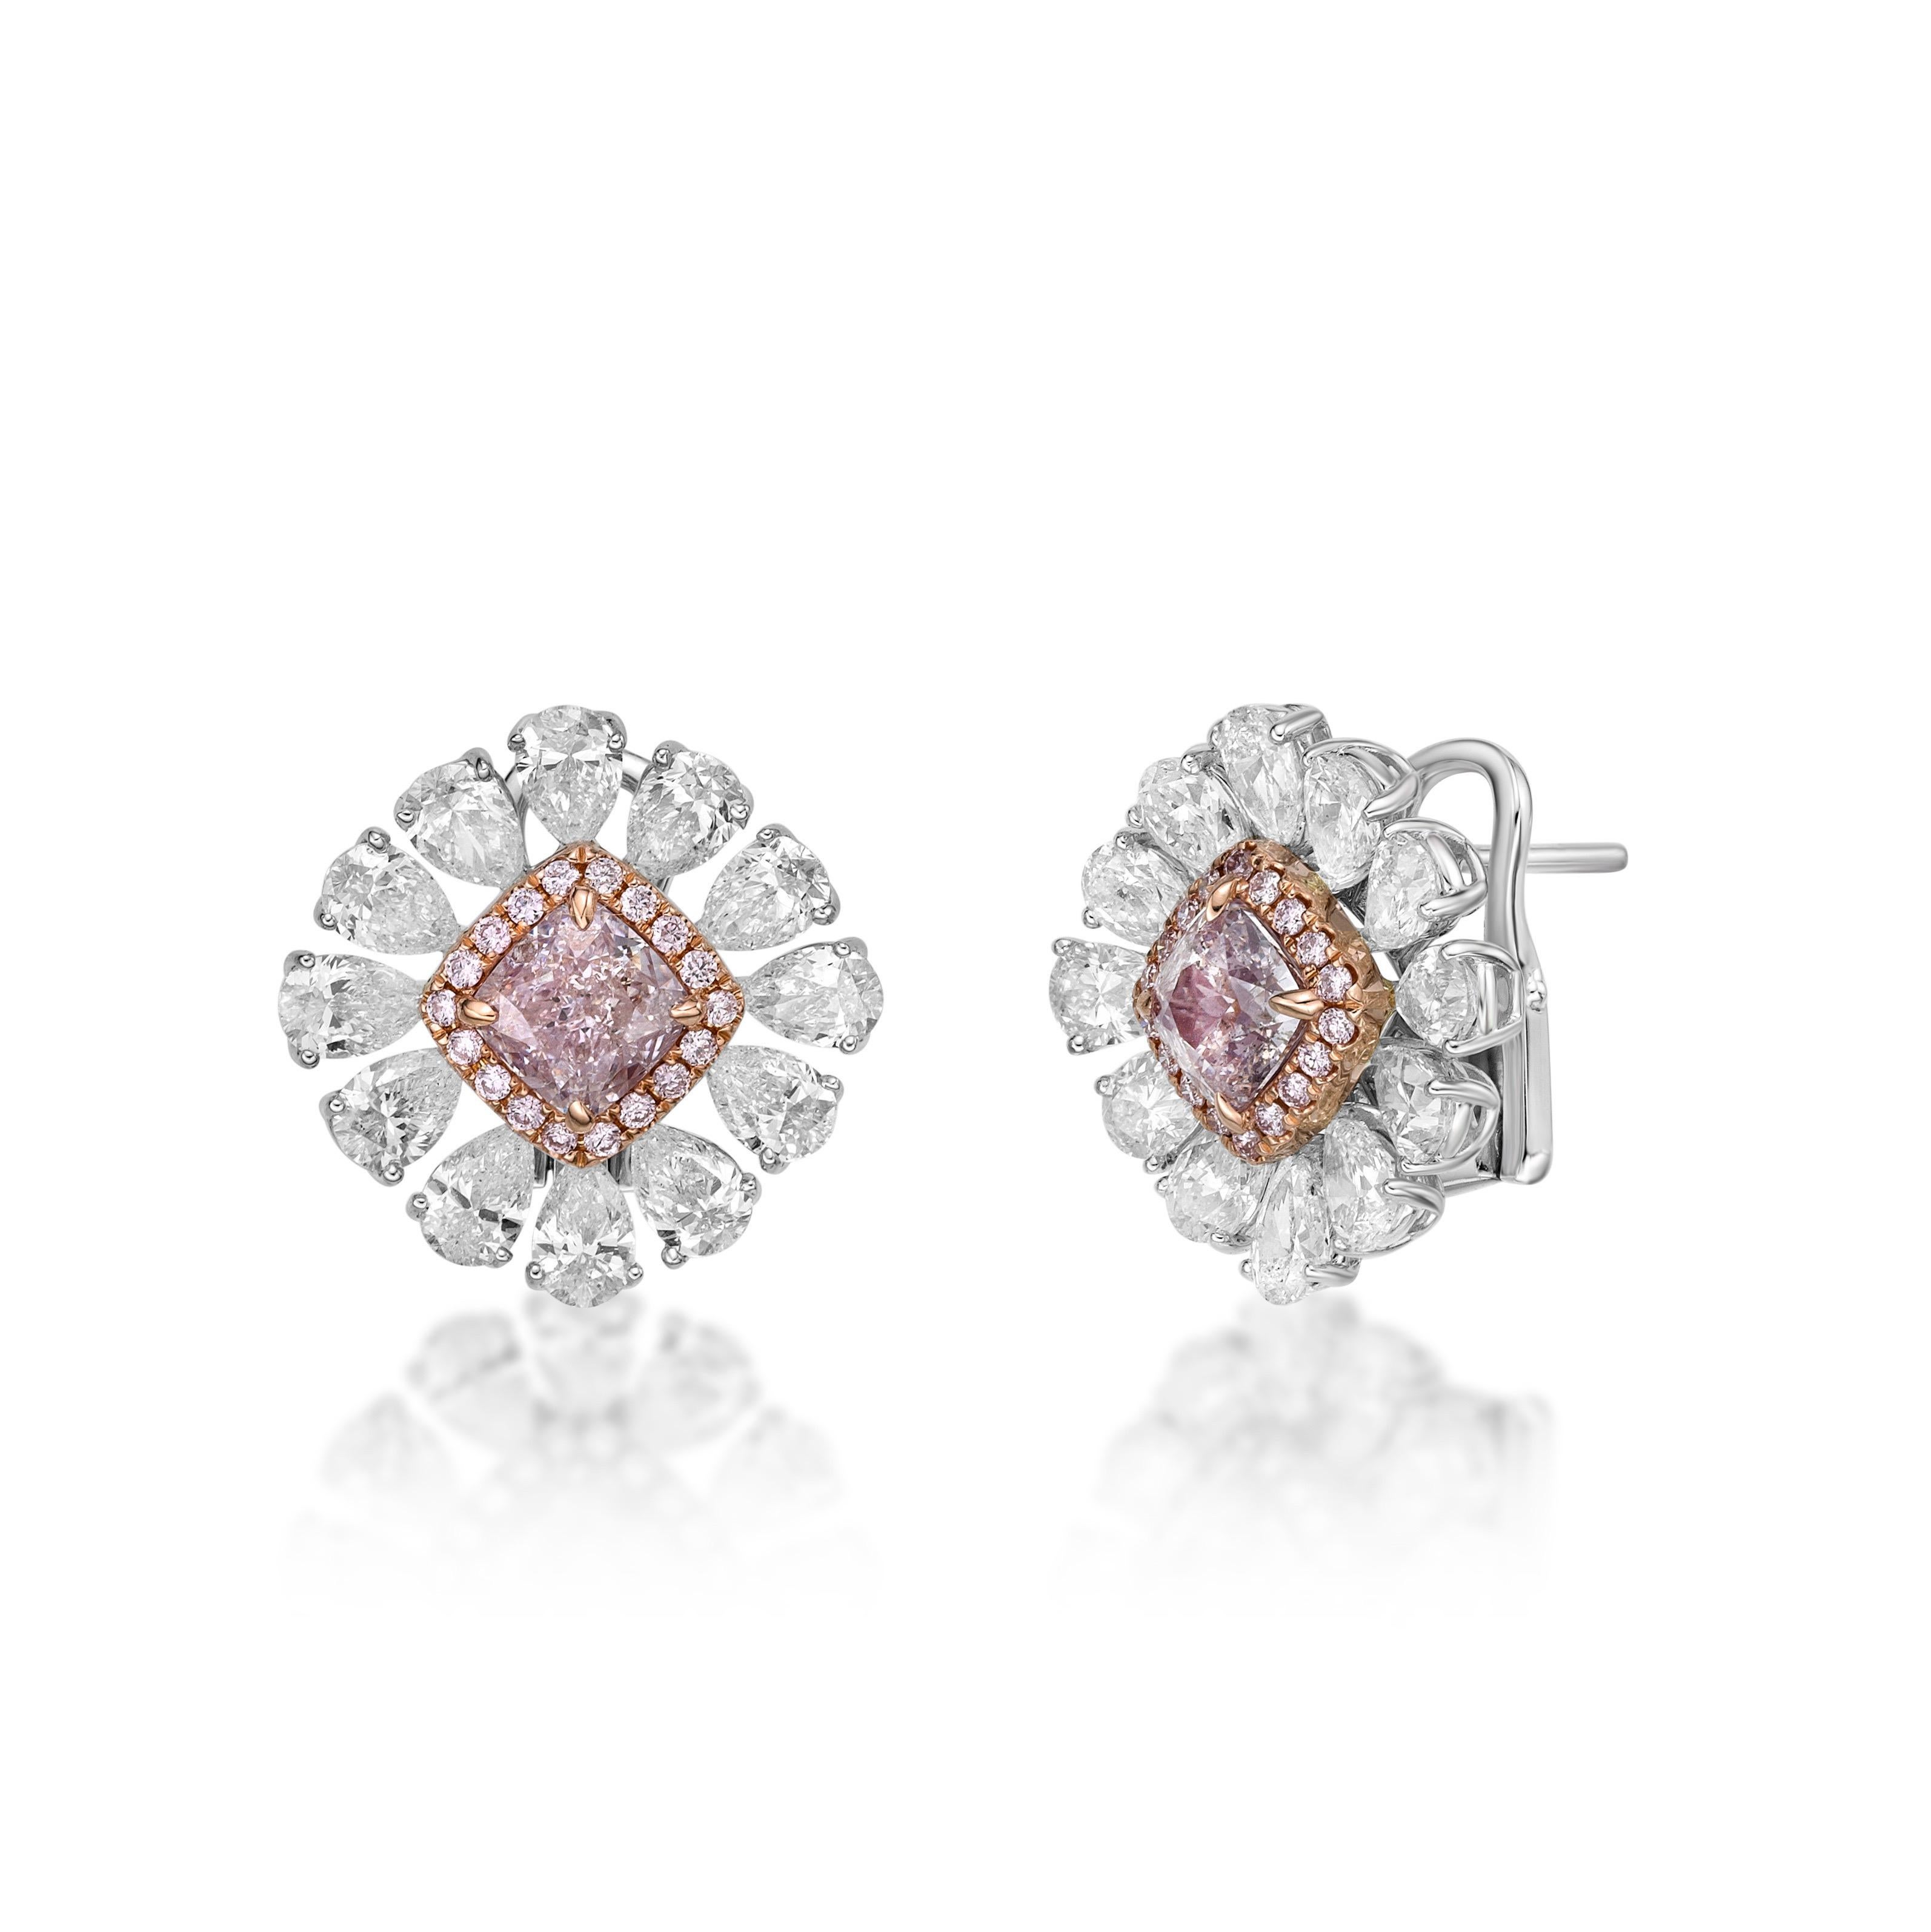 2 center natural pink diamonds 1.50ct
24 diamonds 3.36ct
36 round diamonds 0.16ct

From The Museum Vault at Emilio Jewelry Located on New York's iconic Fifth Avenue,
Showcasing a very special and rare Gia certified natural pink diamond set in the